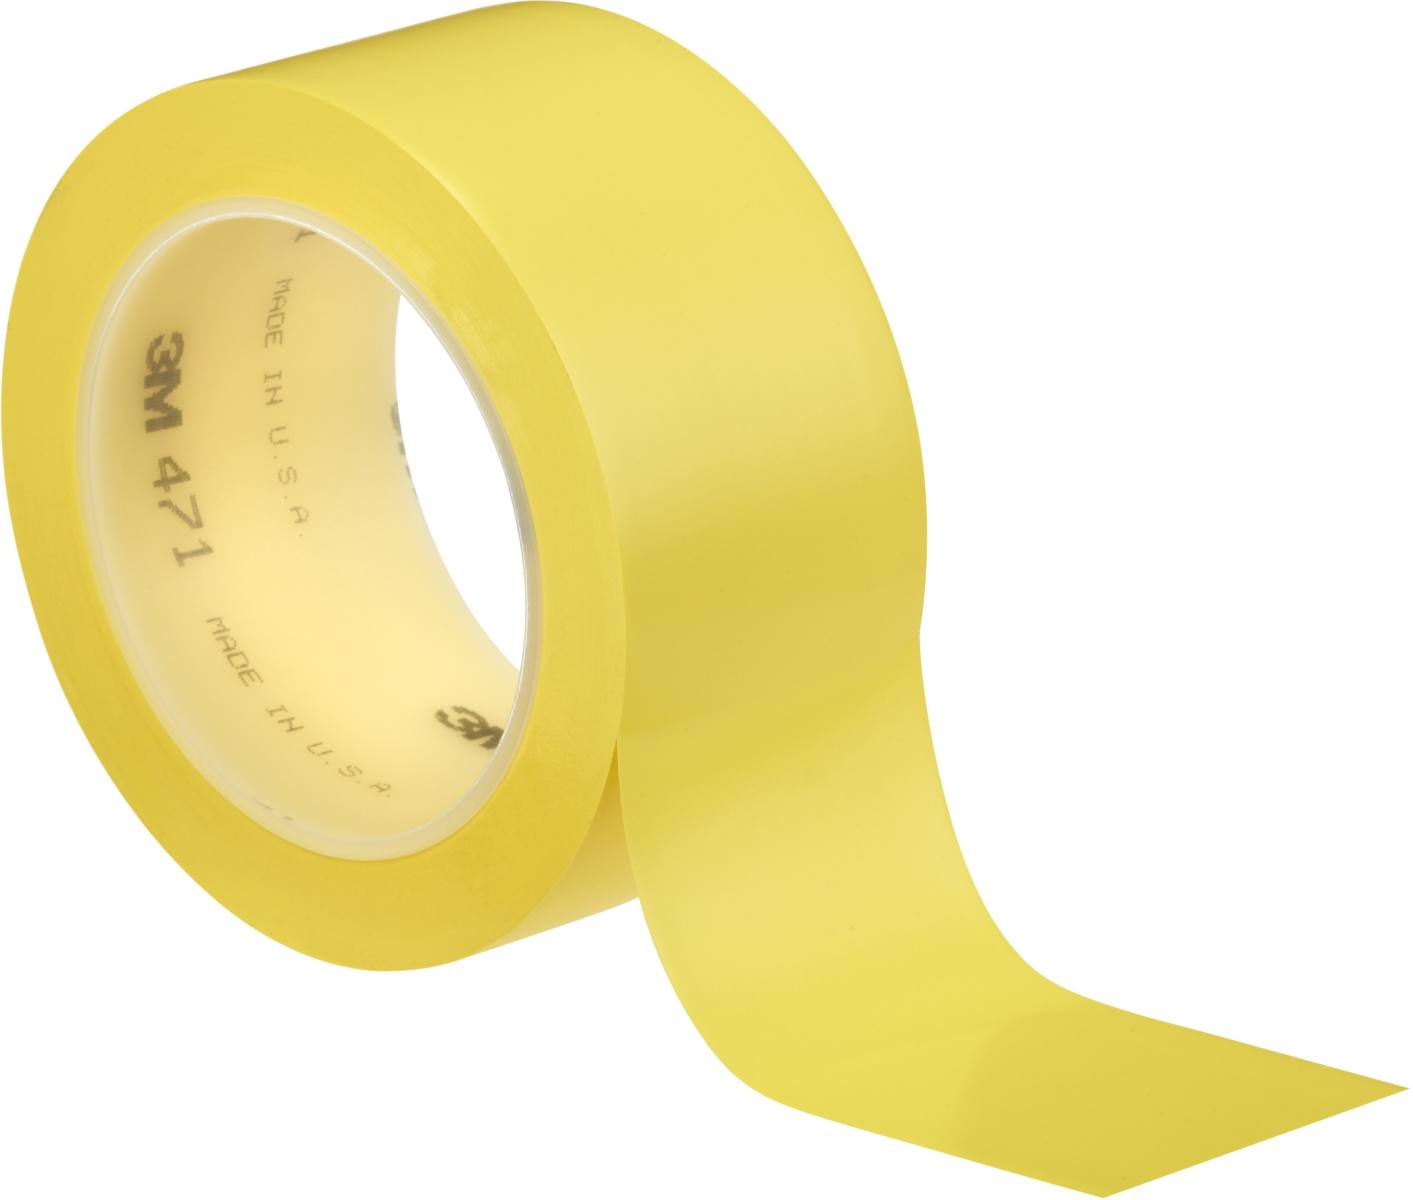 3M soft PVC adhesive tape 471 F, yellow, 50 mm x 33 m, 0.13 mm, individually and practically packed